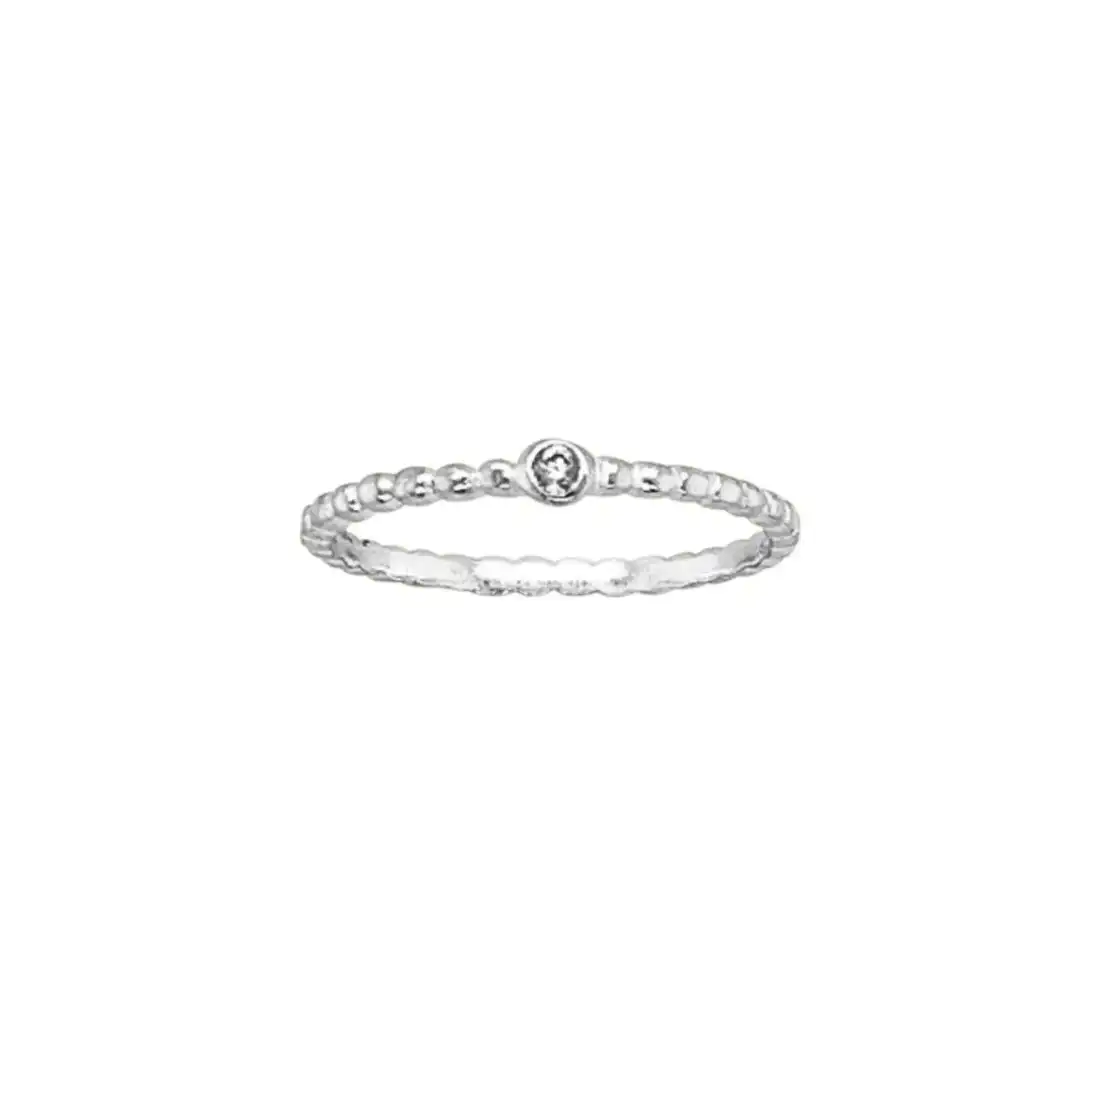 Sterling Silver Beaded Band Ring with White Cubic Zirconia